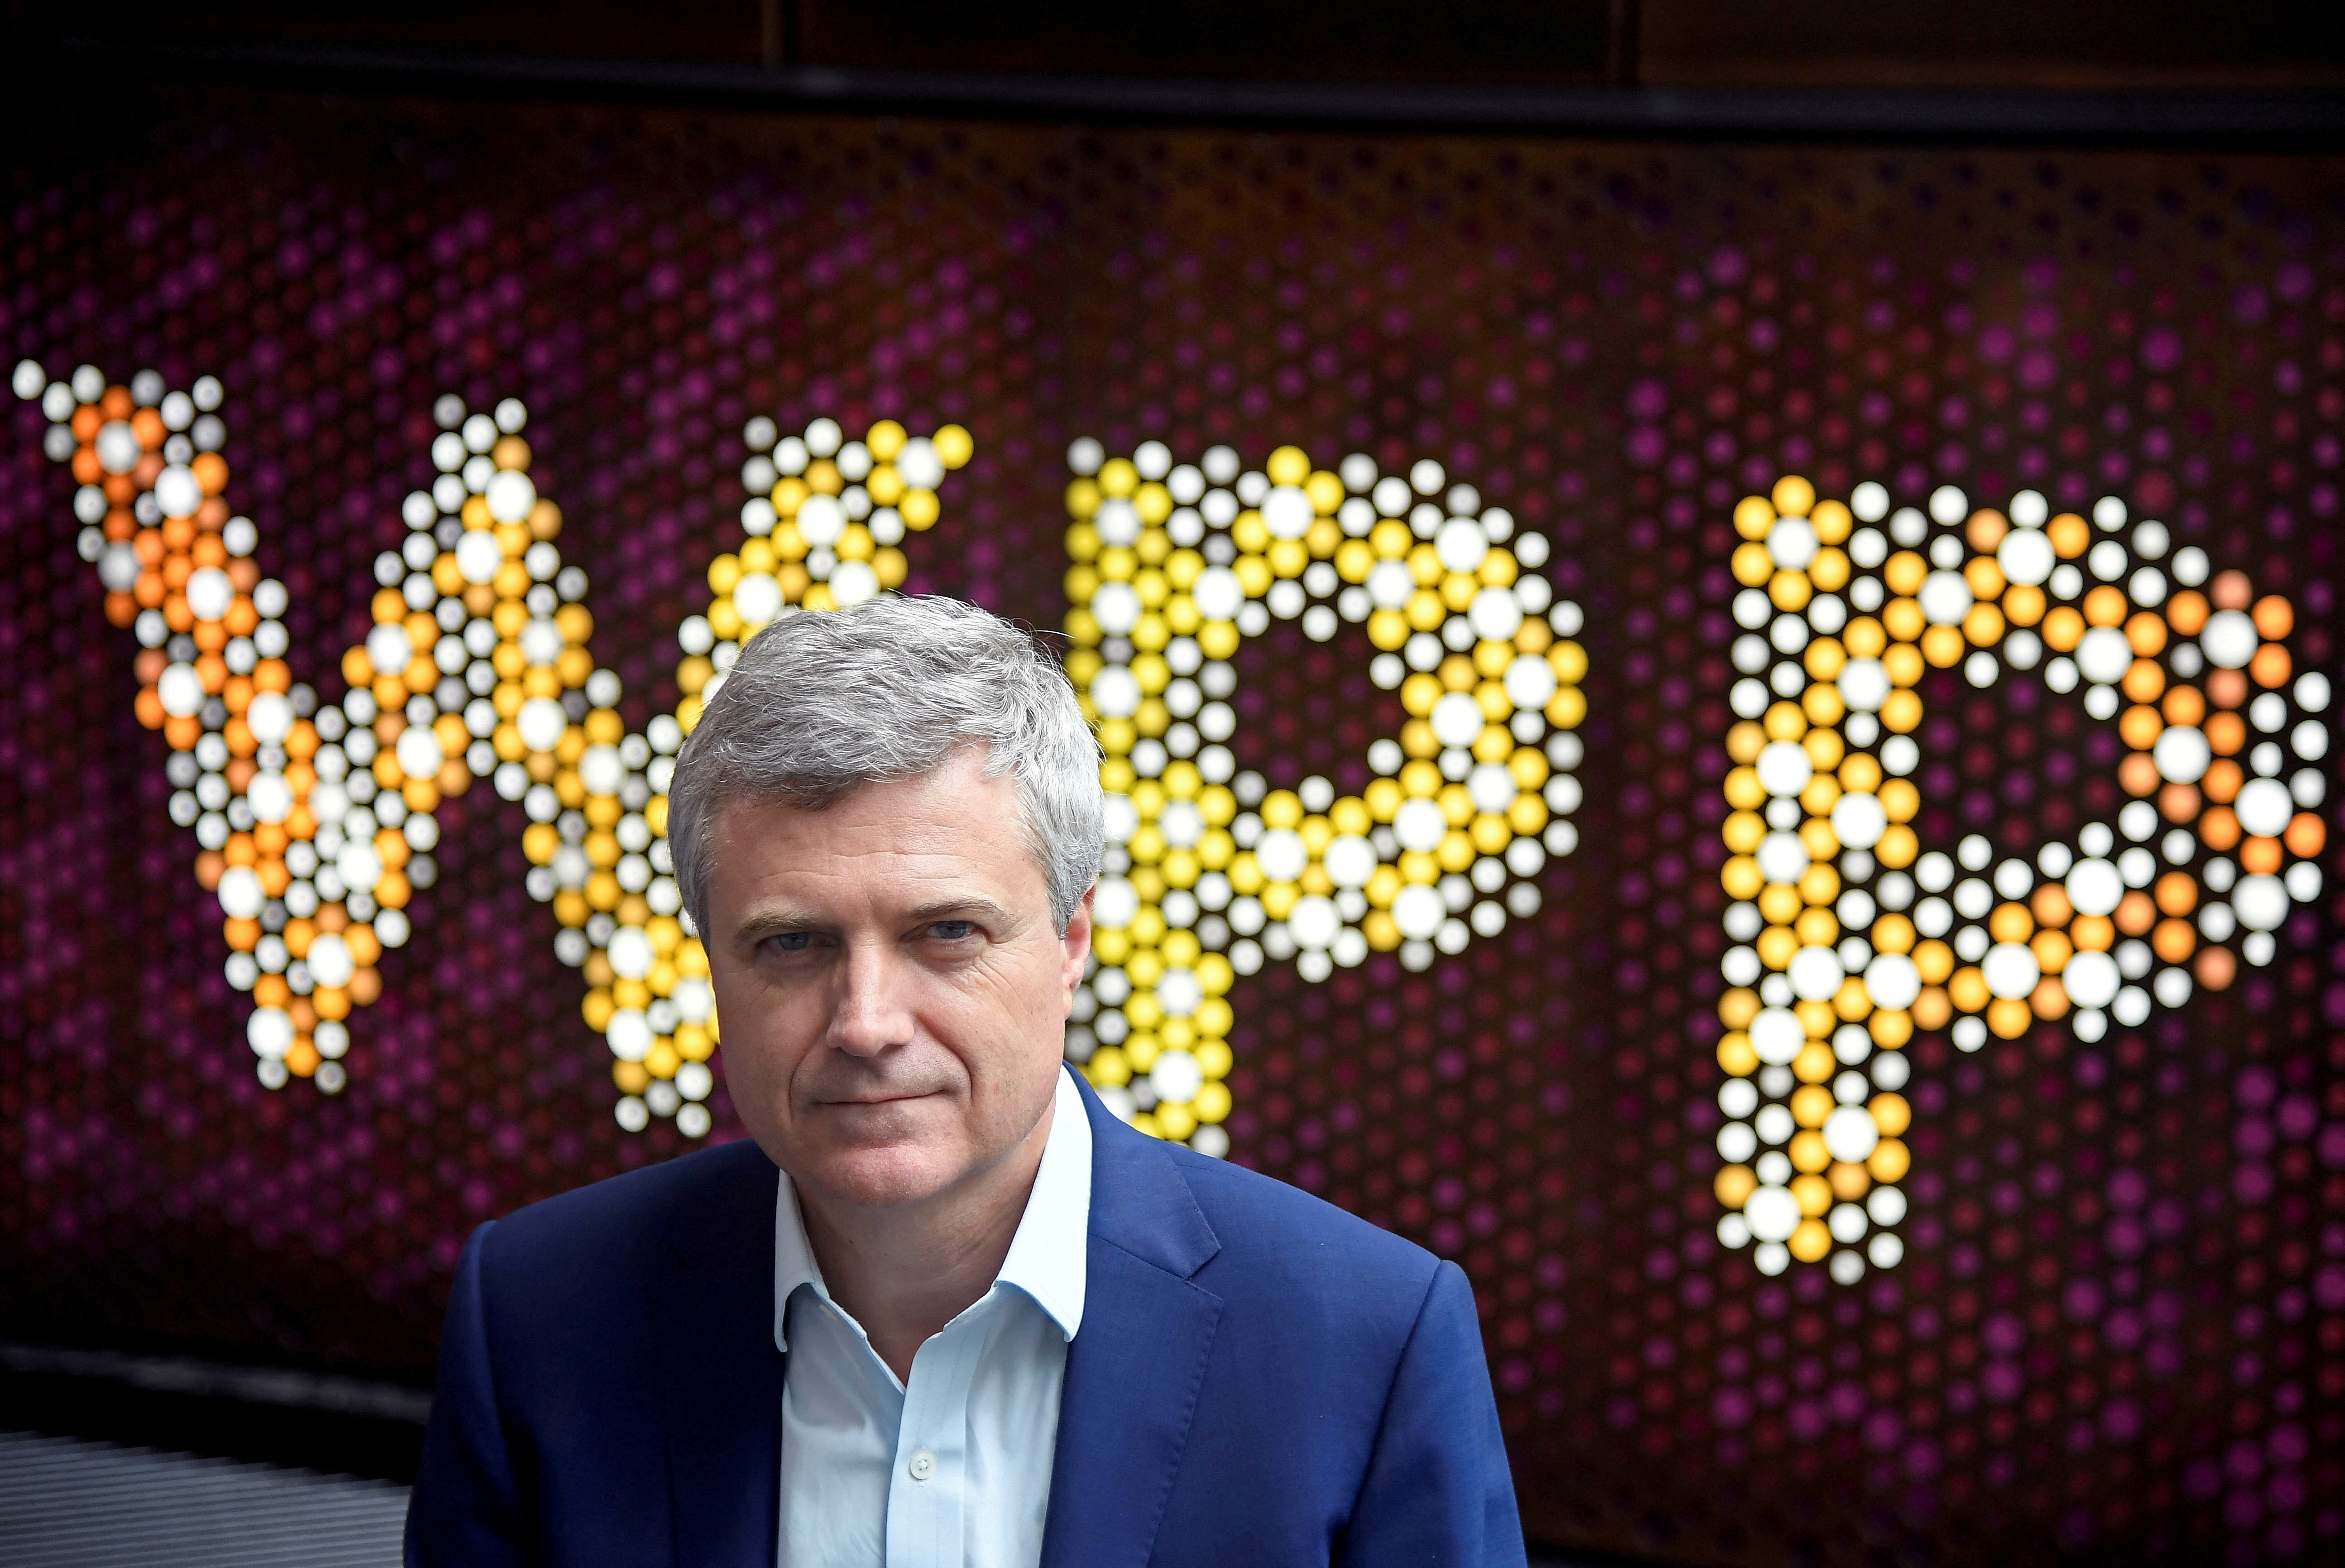 Mark Read, CEO of WPP, the world's biggest advertising and marketing company,  poses for a portrait at their offices in London